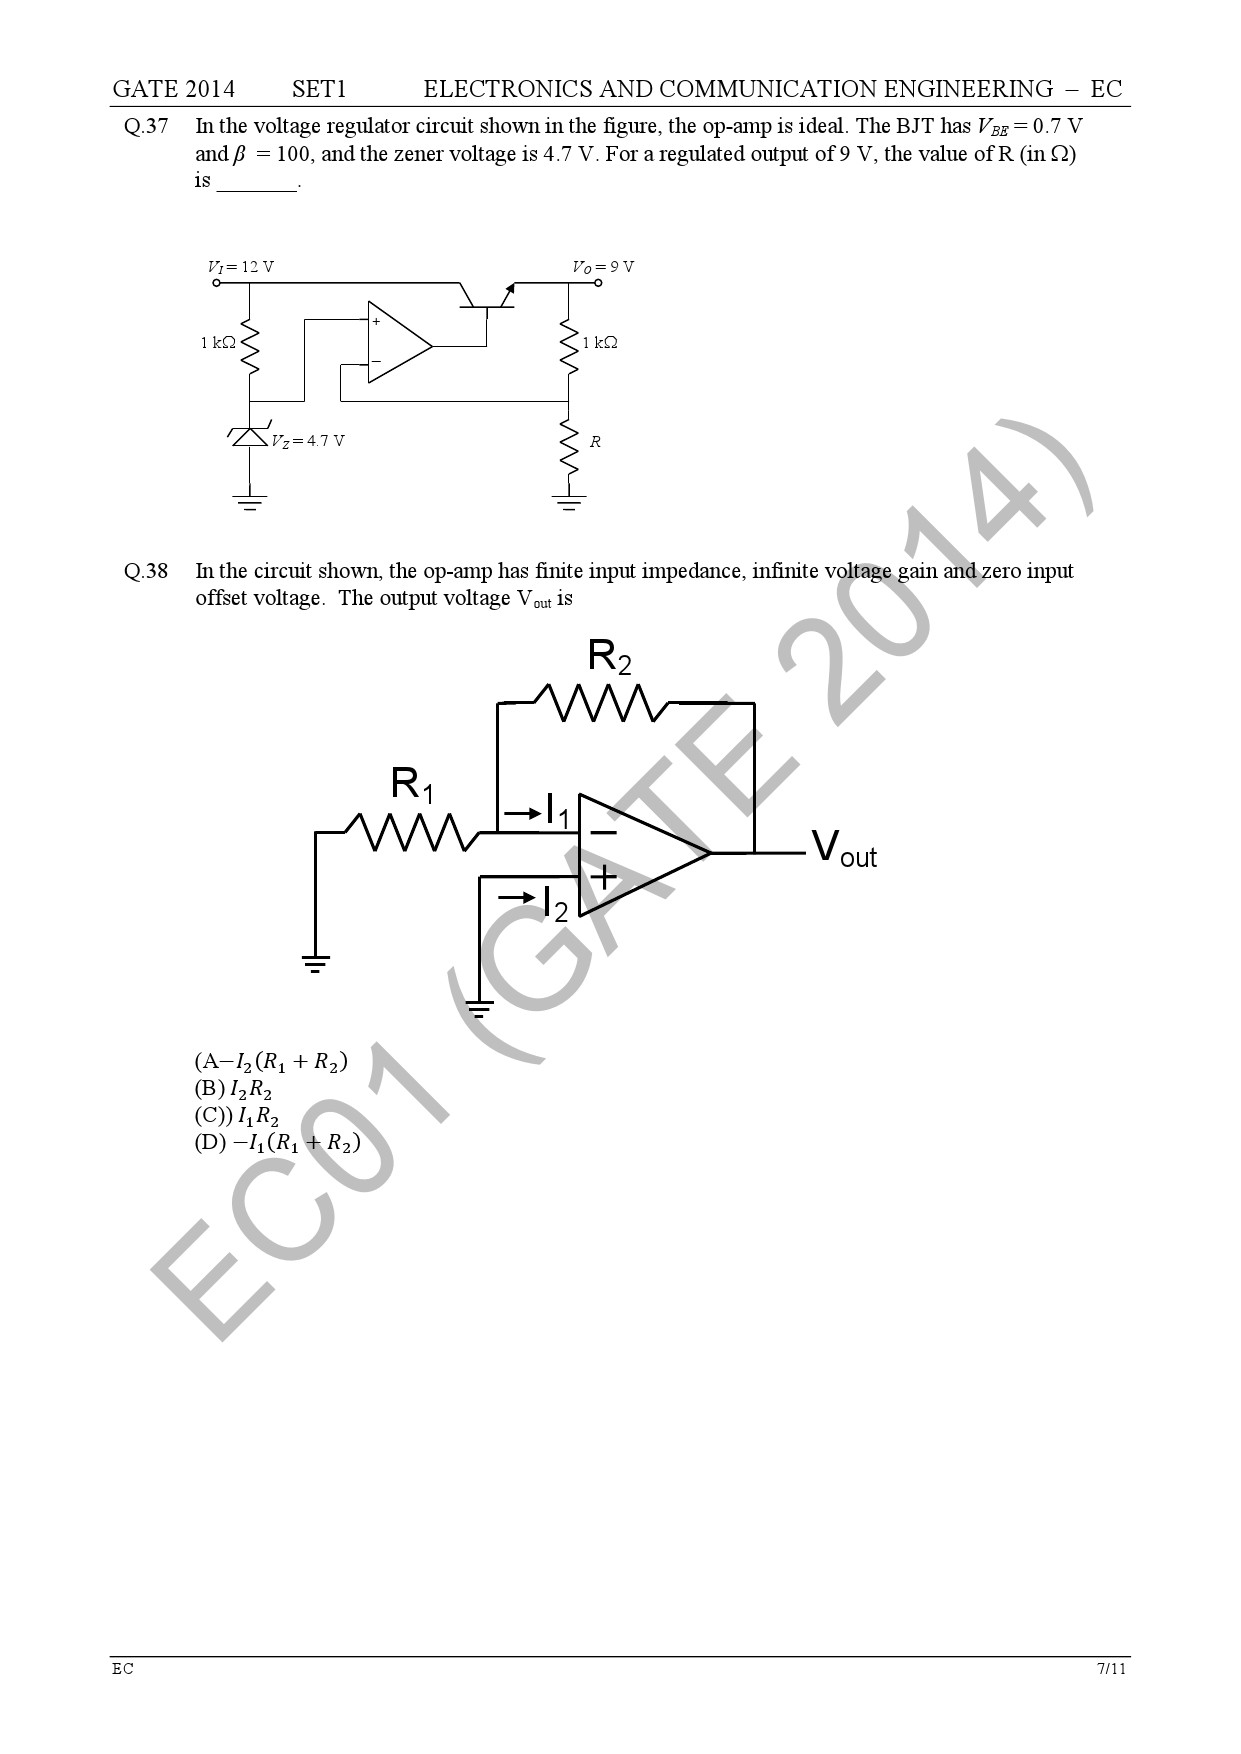 GATE Exam Question Paper 2014 Electronics and Communication Engineering Set 1 13